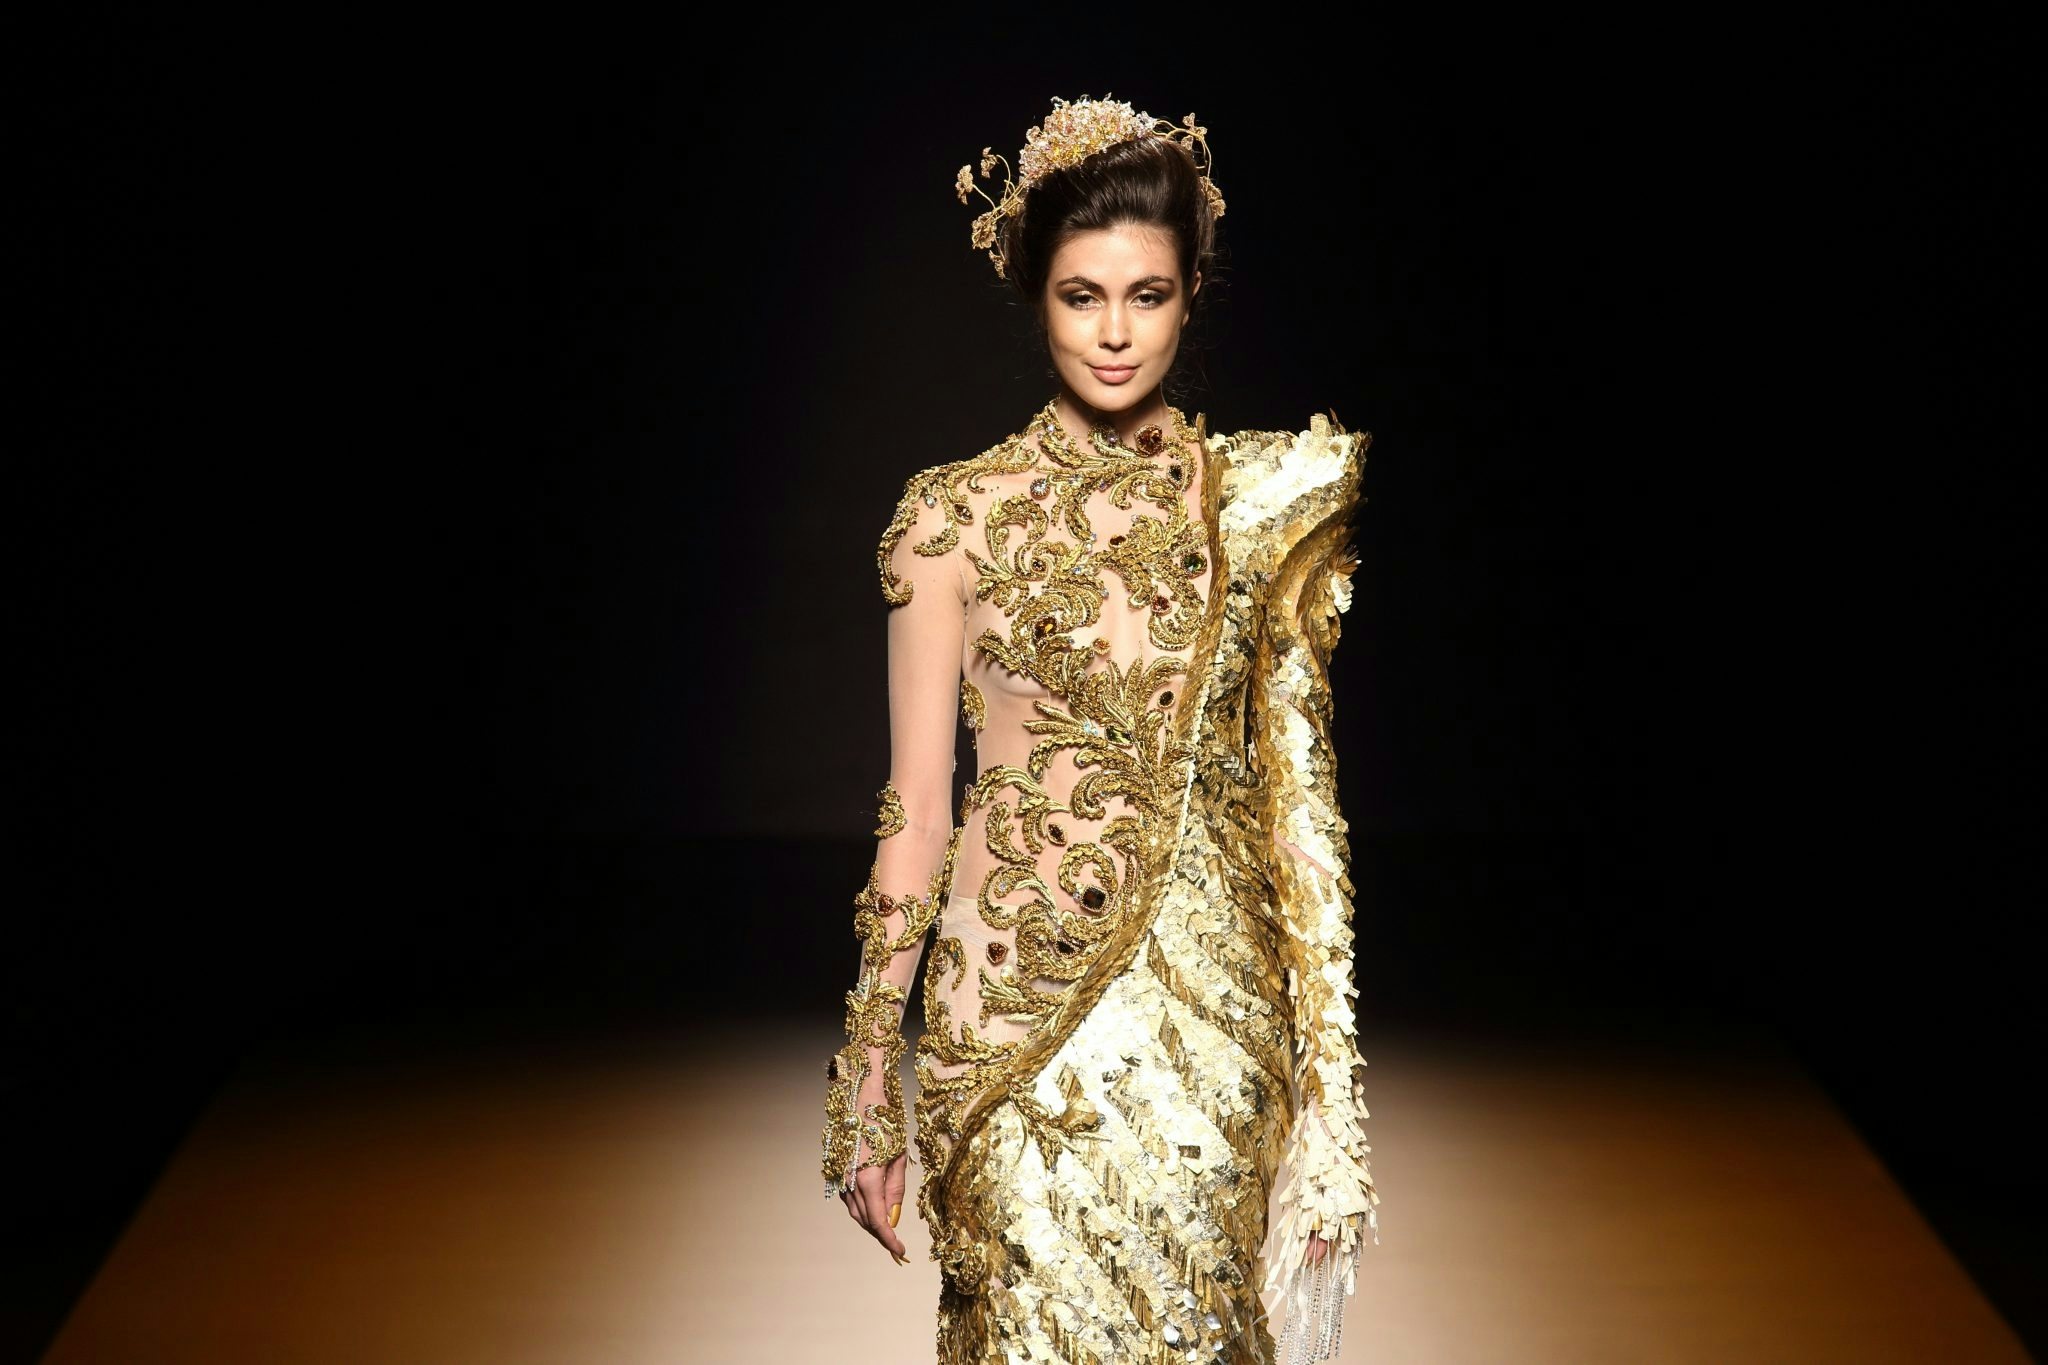 Fashion Show "Guo Pei" Haute Couture from China took place as part of the Bangkok International Fashion Week 2017